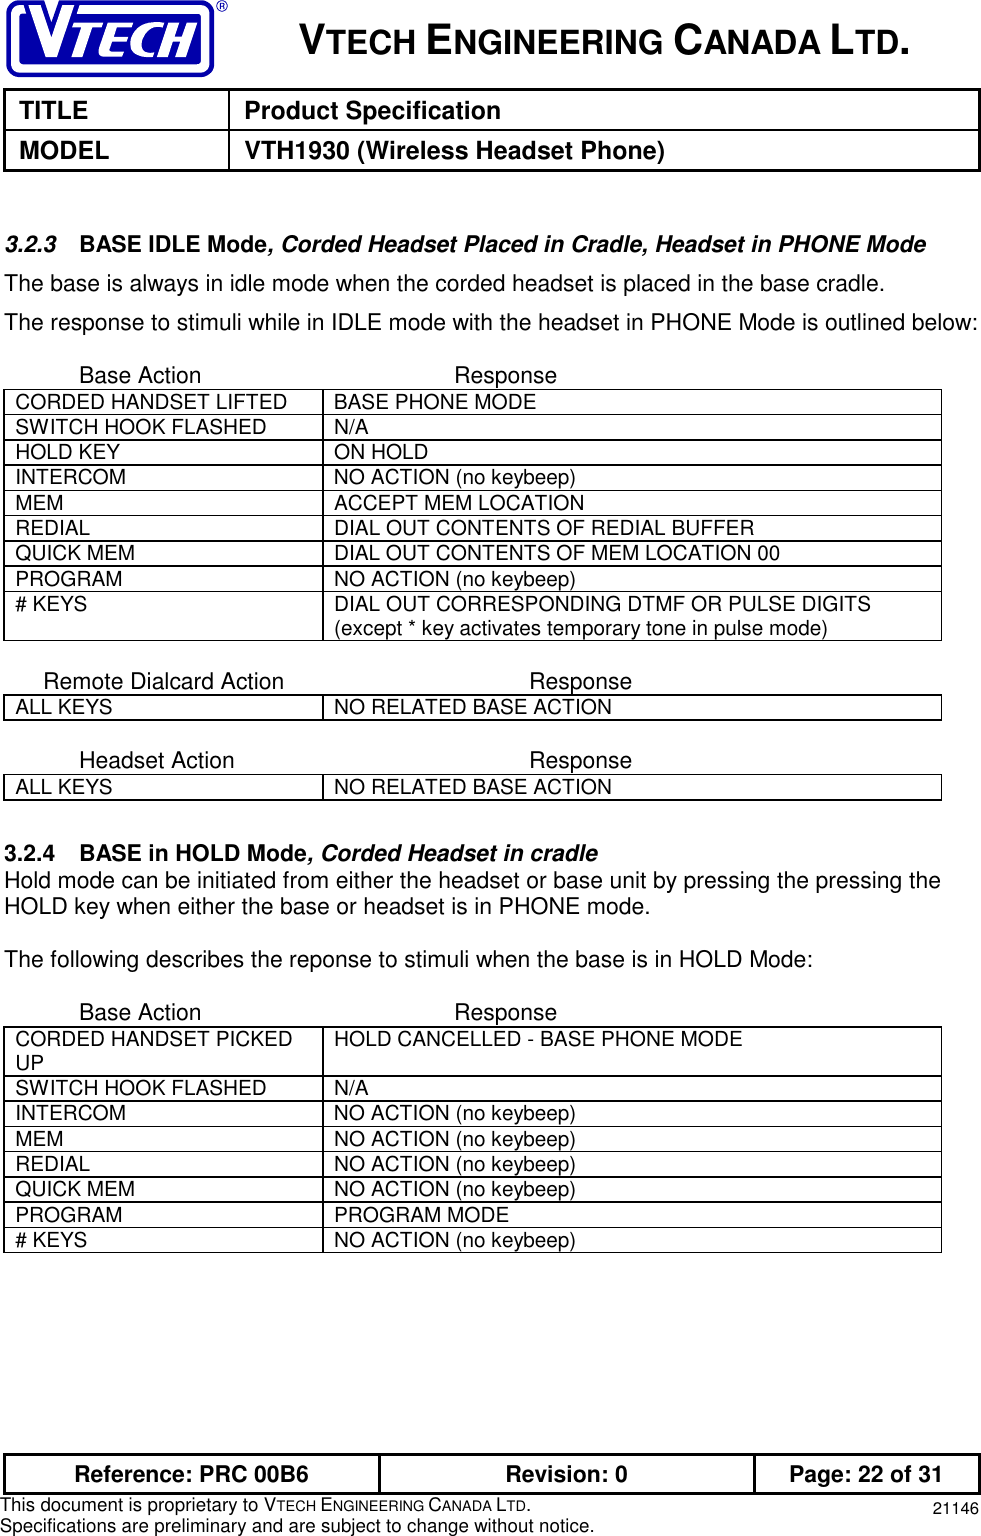 VTECH ENGINEERING CANADA LTD.TITLE Product SpecificationMODEL VTH1930 (Wireless Headset Phone)Reference: PRC 00B6 Revision: 0 Page: 22 of 31This document is proprietary to VTECH ENGINEERING CANADA LTD.Specifications are preliminary and are subject to change without notice. 211463.2.3  BASE IDLE Mode, Corded Headset Placed in Cradle, Headset in PHONE ModeThe base is always in idle mode when the corded headset is placed in the base cradle.The response to stimuli while in IDLE mode with the headset in PHONE Mode is outlined below:Base Action ResponseCORDED HANDSET LIFTED BASE PHONE MODESWITCH HOOK FLASHED N/AHOLD KEY ON HOLDINTERCOM NO ACTION (no keybeep)MEM ACCEPT MEM LOCATIONREDIAL DIAL OUT CONTENTS OF REDIAL BUFFERQUICK MEM DIAL OUT CONTENTS OF MEM LOCATION 00PROGRAM NO ACTION (no keybeep)# KEYS DIAL OUT CORRESPONDING DTMF OR PULSE DIGITS(except * key activates temporary tone in pulse mode)      Remote Dialcard Action ResponseALL KEYS NO RELATED BASE ACTIONHeadset Action ResponseALL KEYS NO RELATED BASE ACTION3.2.4 BASE in HOLD Mode, Corded Headset in cradleHold mode can be initiated from either the headset or base unit by pressing the pressing theHOLD key when either the base or headset is in PHONE mode.The following describes the reponse to stimuli when the base is in HOLD Mode:Base Action ResponseCORDED HANDSET PICKEDUP HOLD CANCELLED - BASE PHONE MODESWITCH HOOK FLASHED N/AINTERCOM NO ACTION (no keybeep)MEM NO ACTION (no keybeep)REDIAL NO ACTION (no keybeep)QUICK MEM NO ACTION (no keybeep)PROGRAM PROGRAM MODE# KEYS NO ACTION (no keybeep)